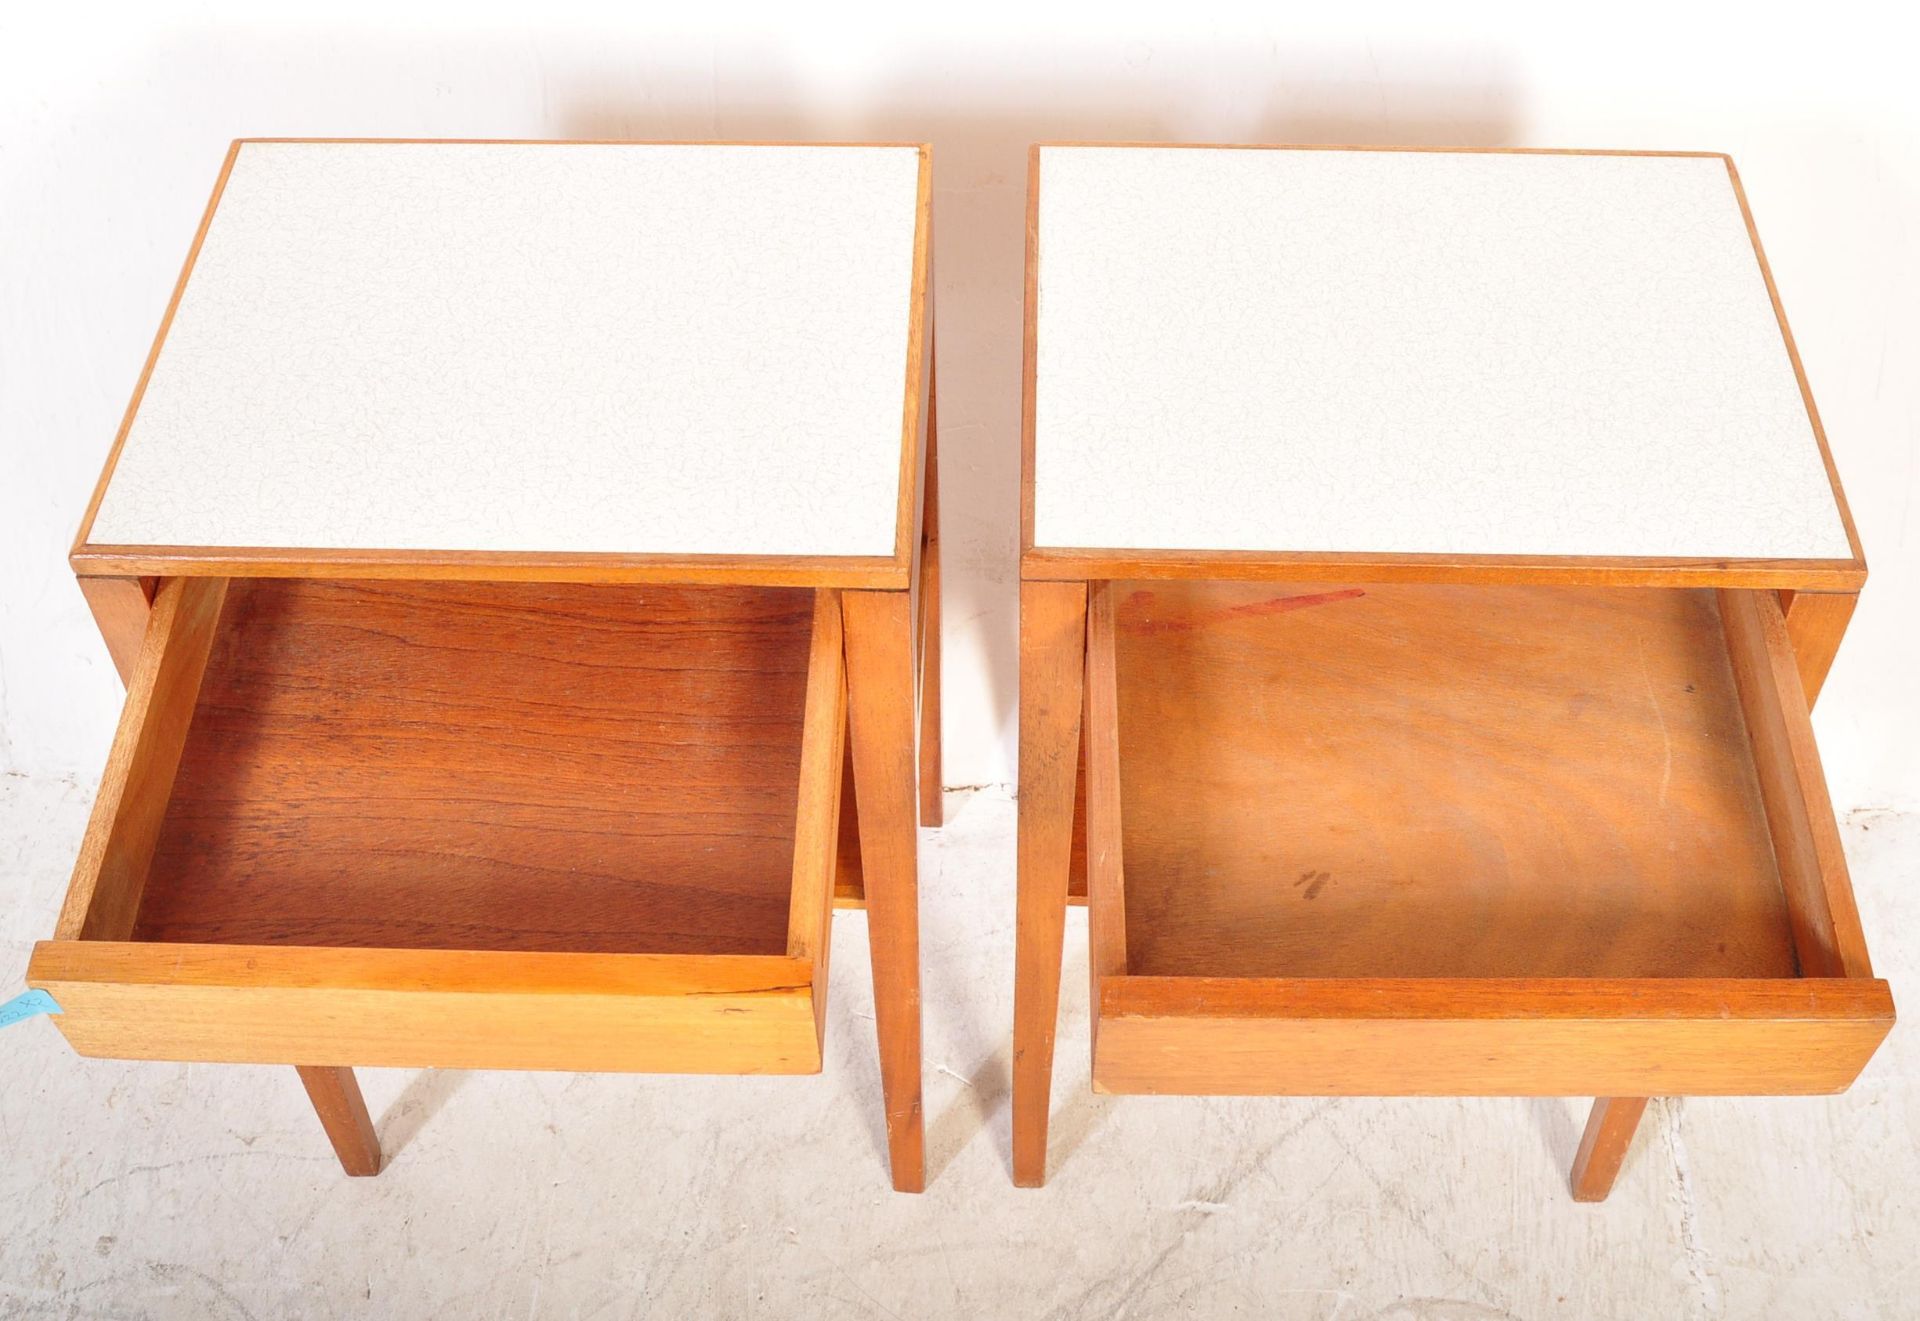 PAIR OF VINTAGE AIR MINISTRY BEDSIDE TABLES - Image 3 of 5